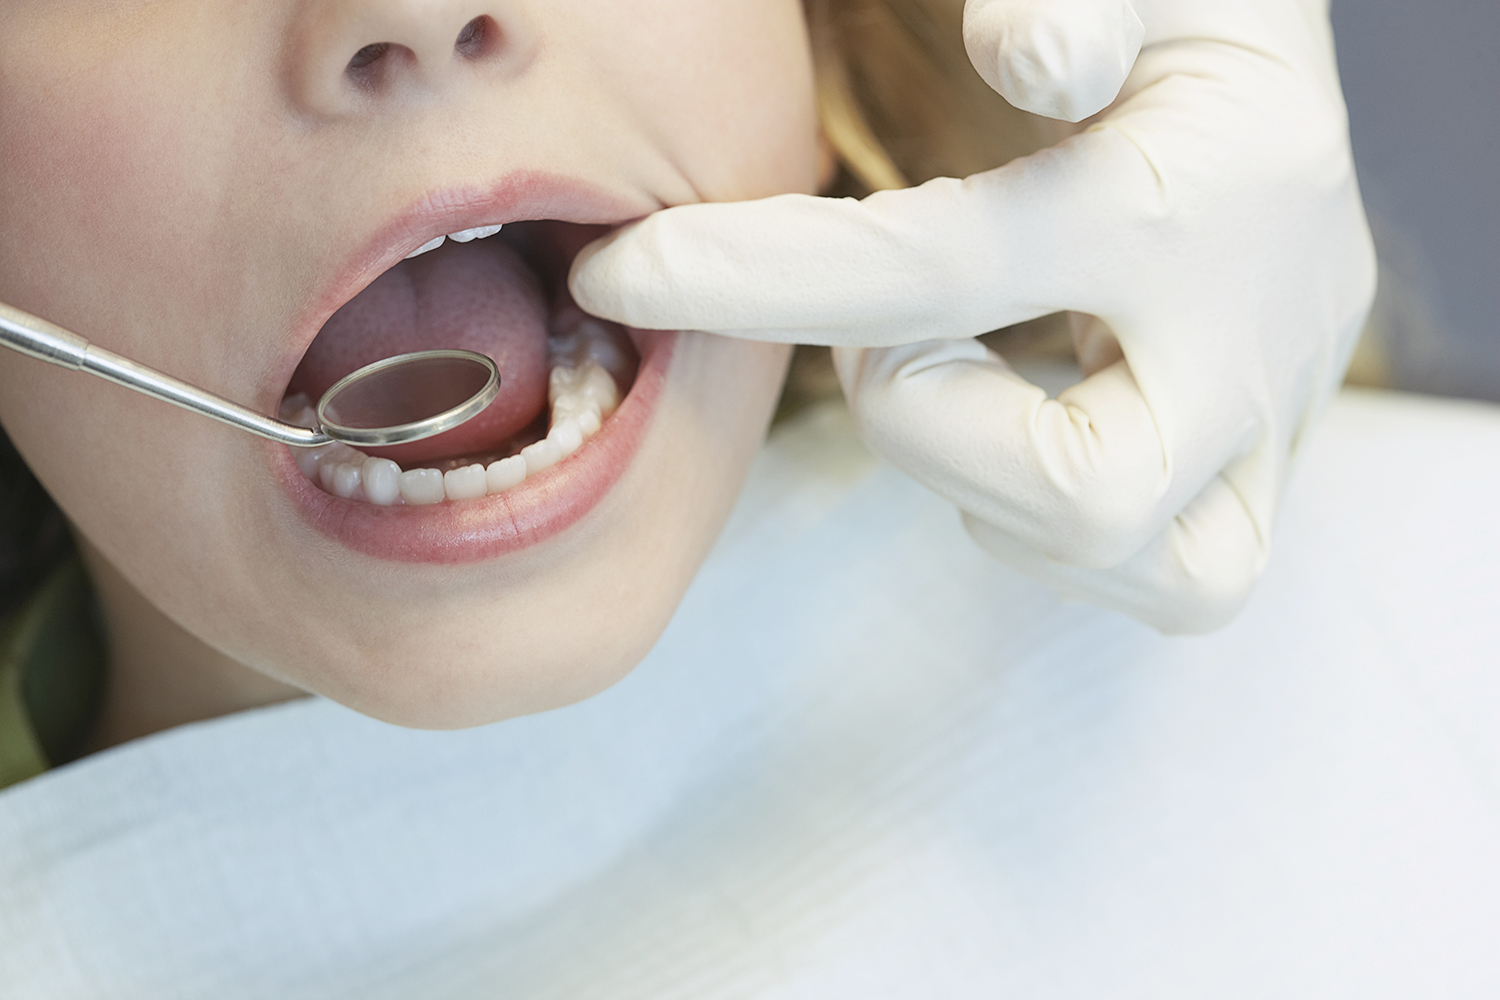 Assessing Risk Helps Dentists Tailor Preventive Treatments for Young ChildrenUC San Francisco